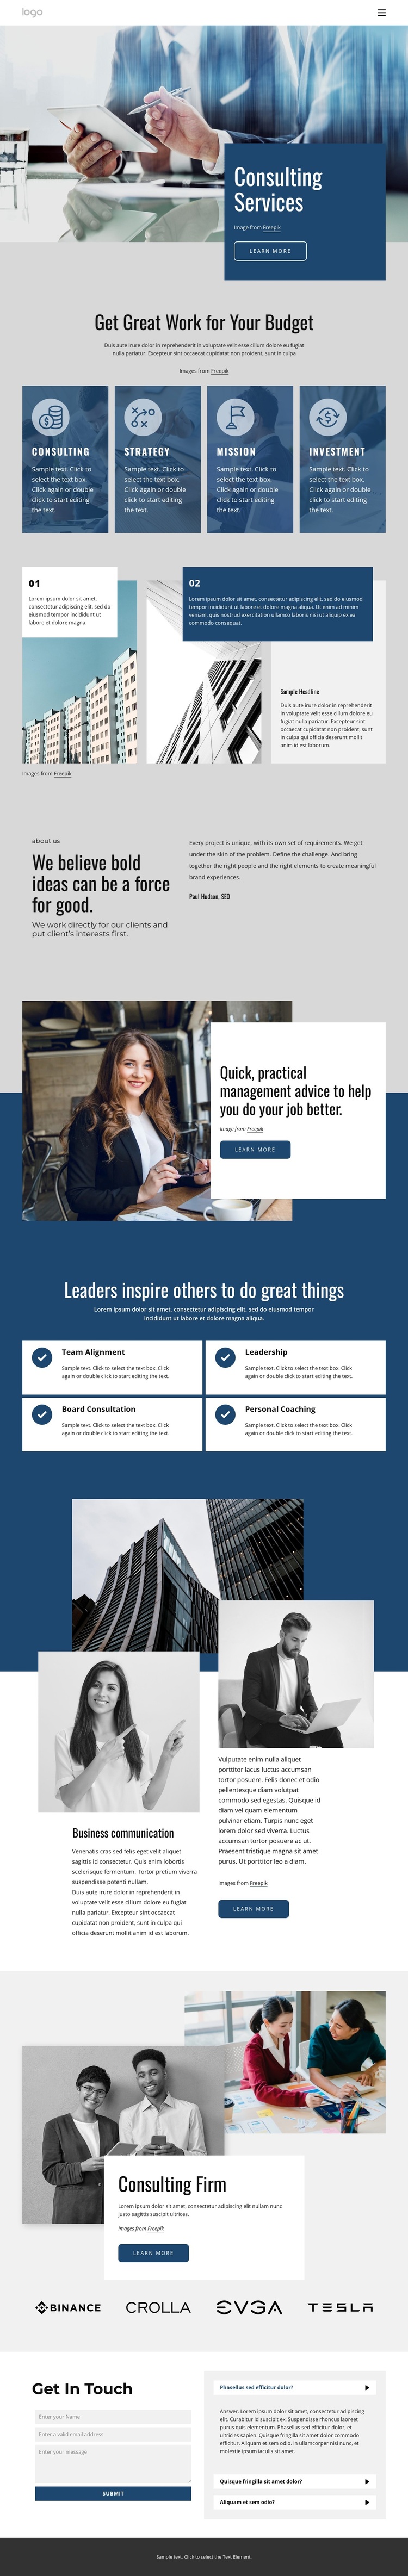 Professional consulting service firm Template